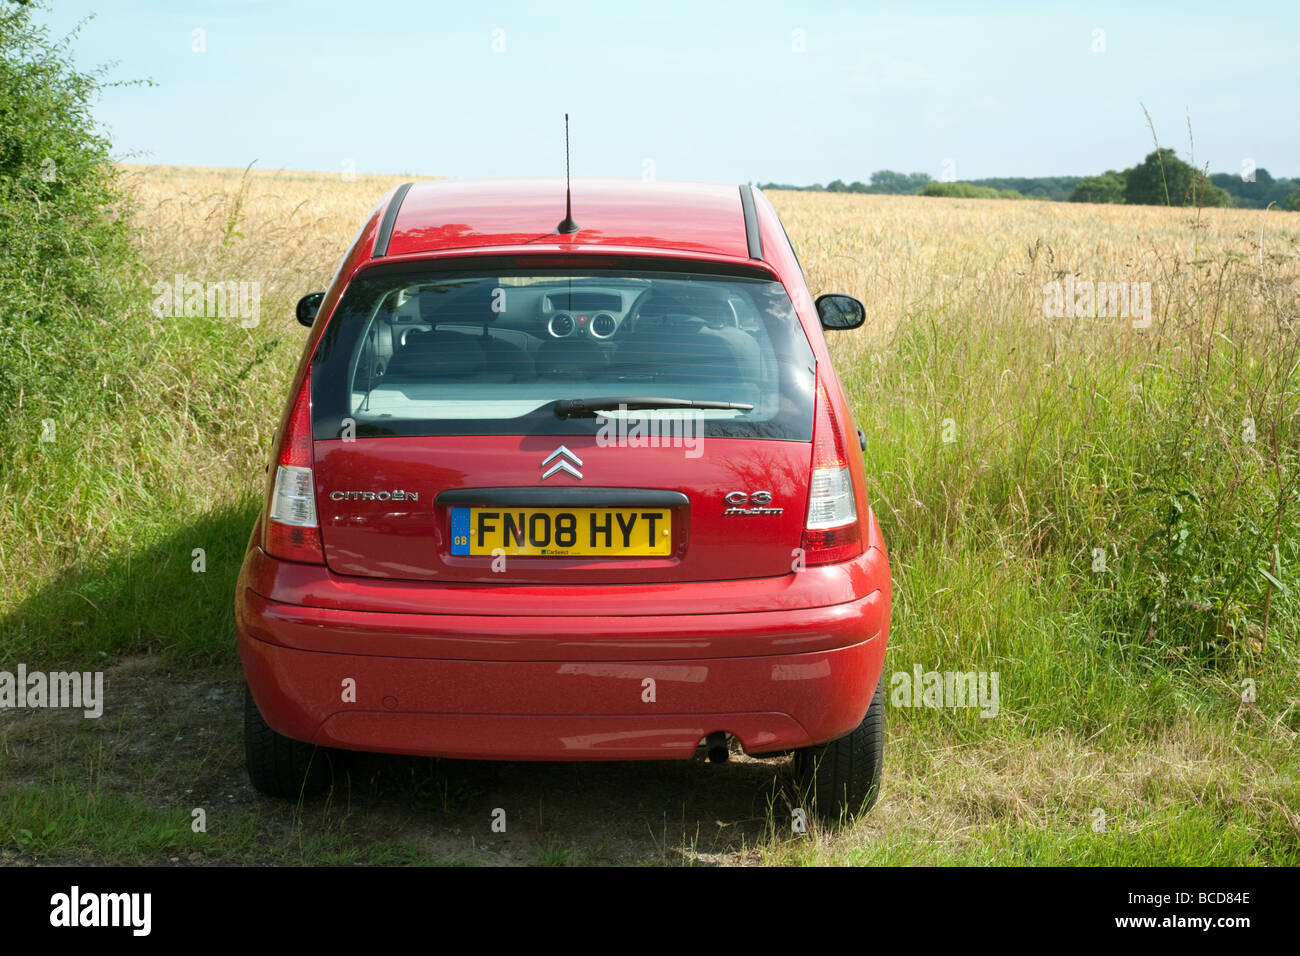 A red car parked on the edge of a cornfield, Essex, England Stock Photo